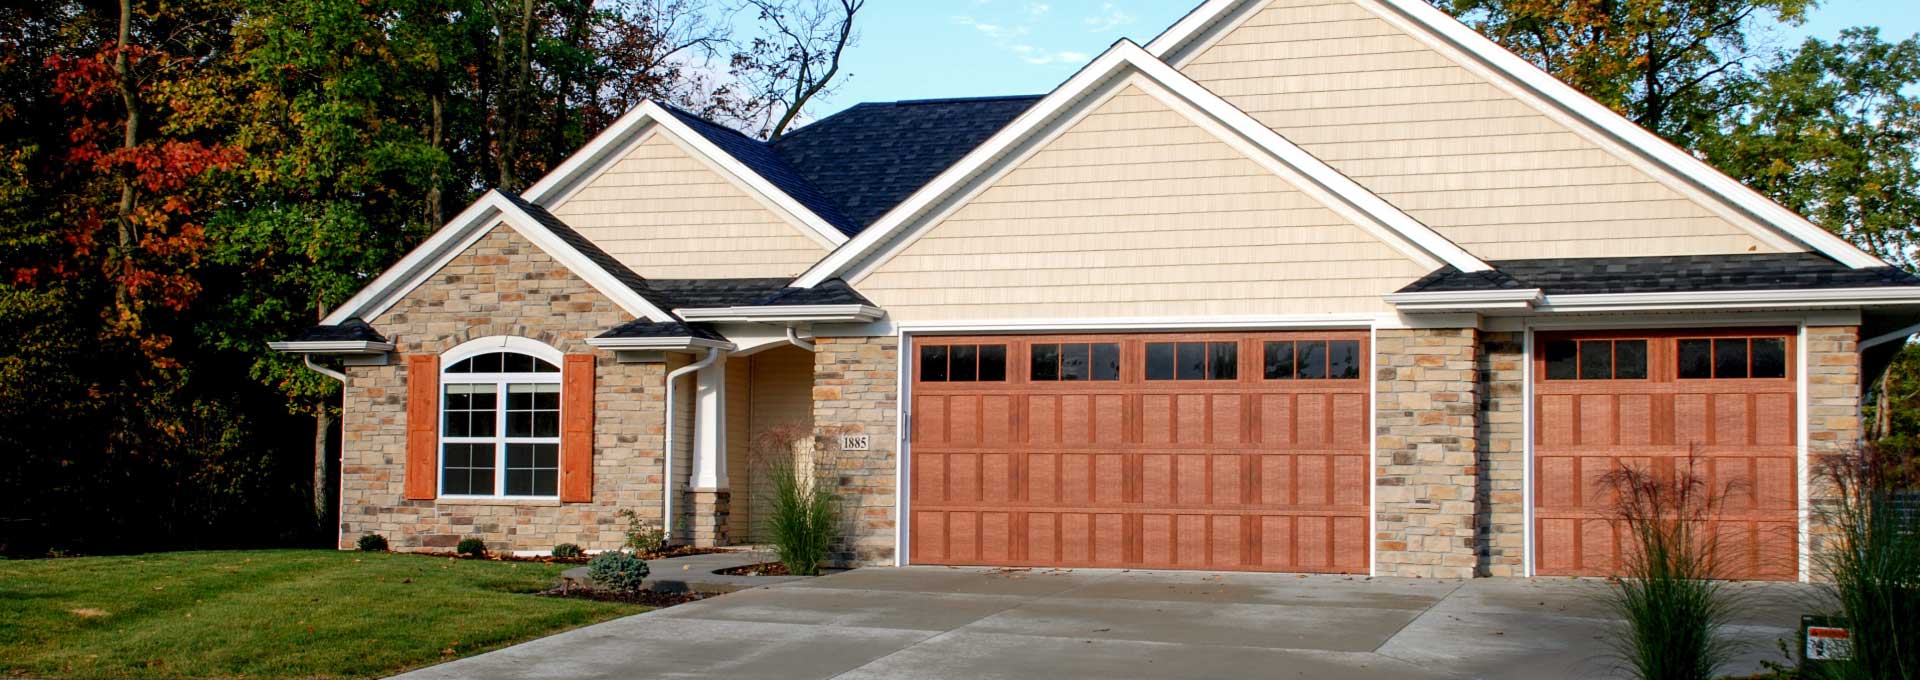 Distinctive maintenance free Carriage House designs available in stained and painted finishes.